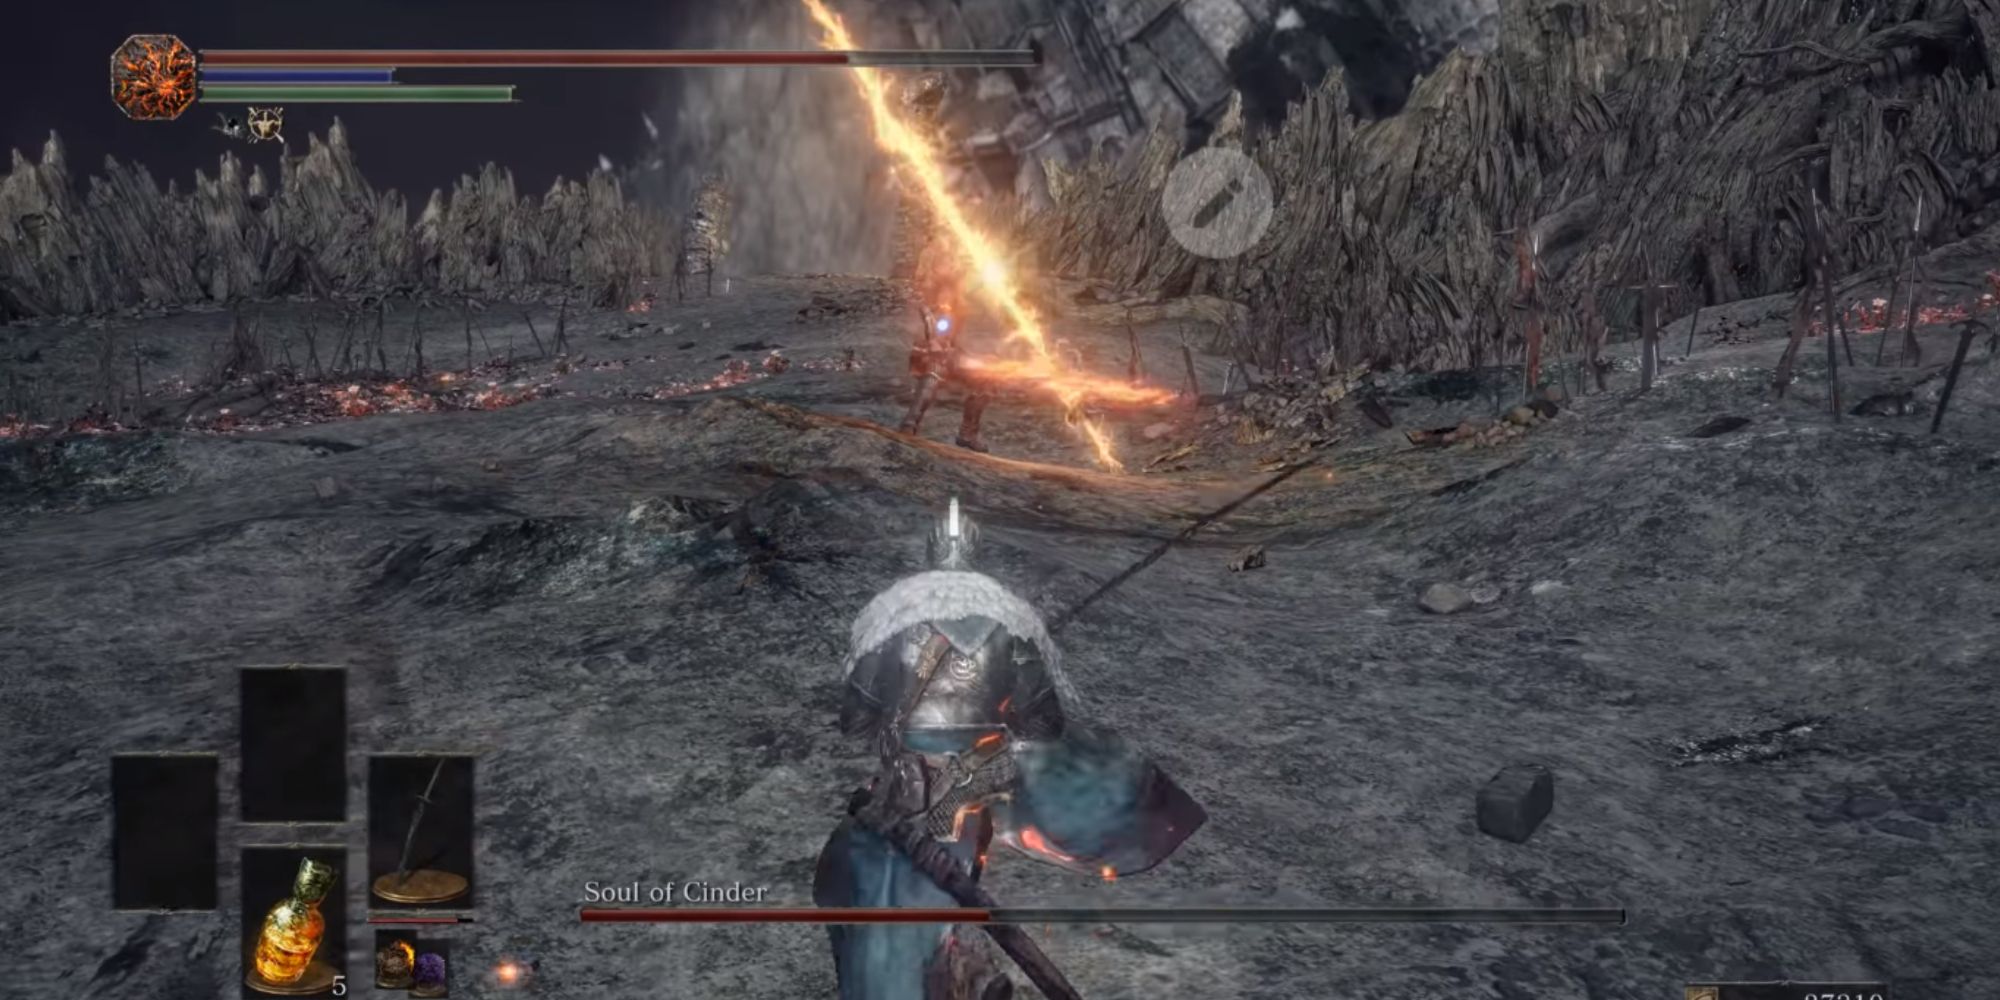 The boss throwing a Lightning Spear at the player.